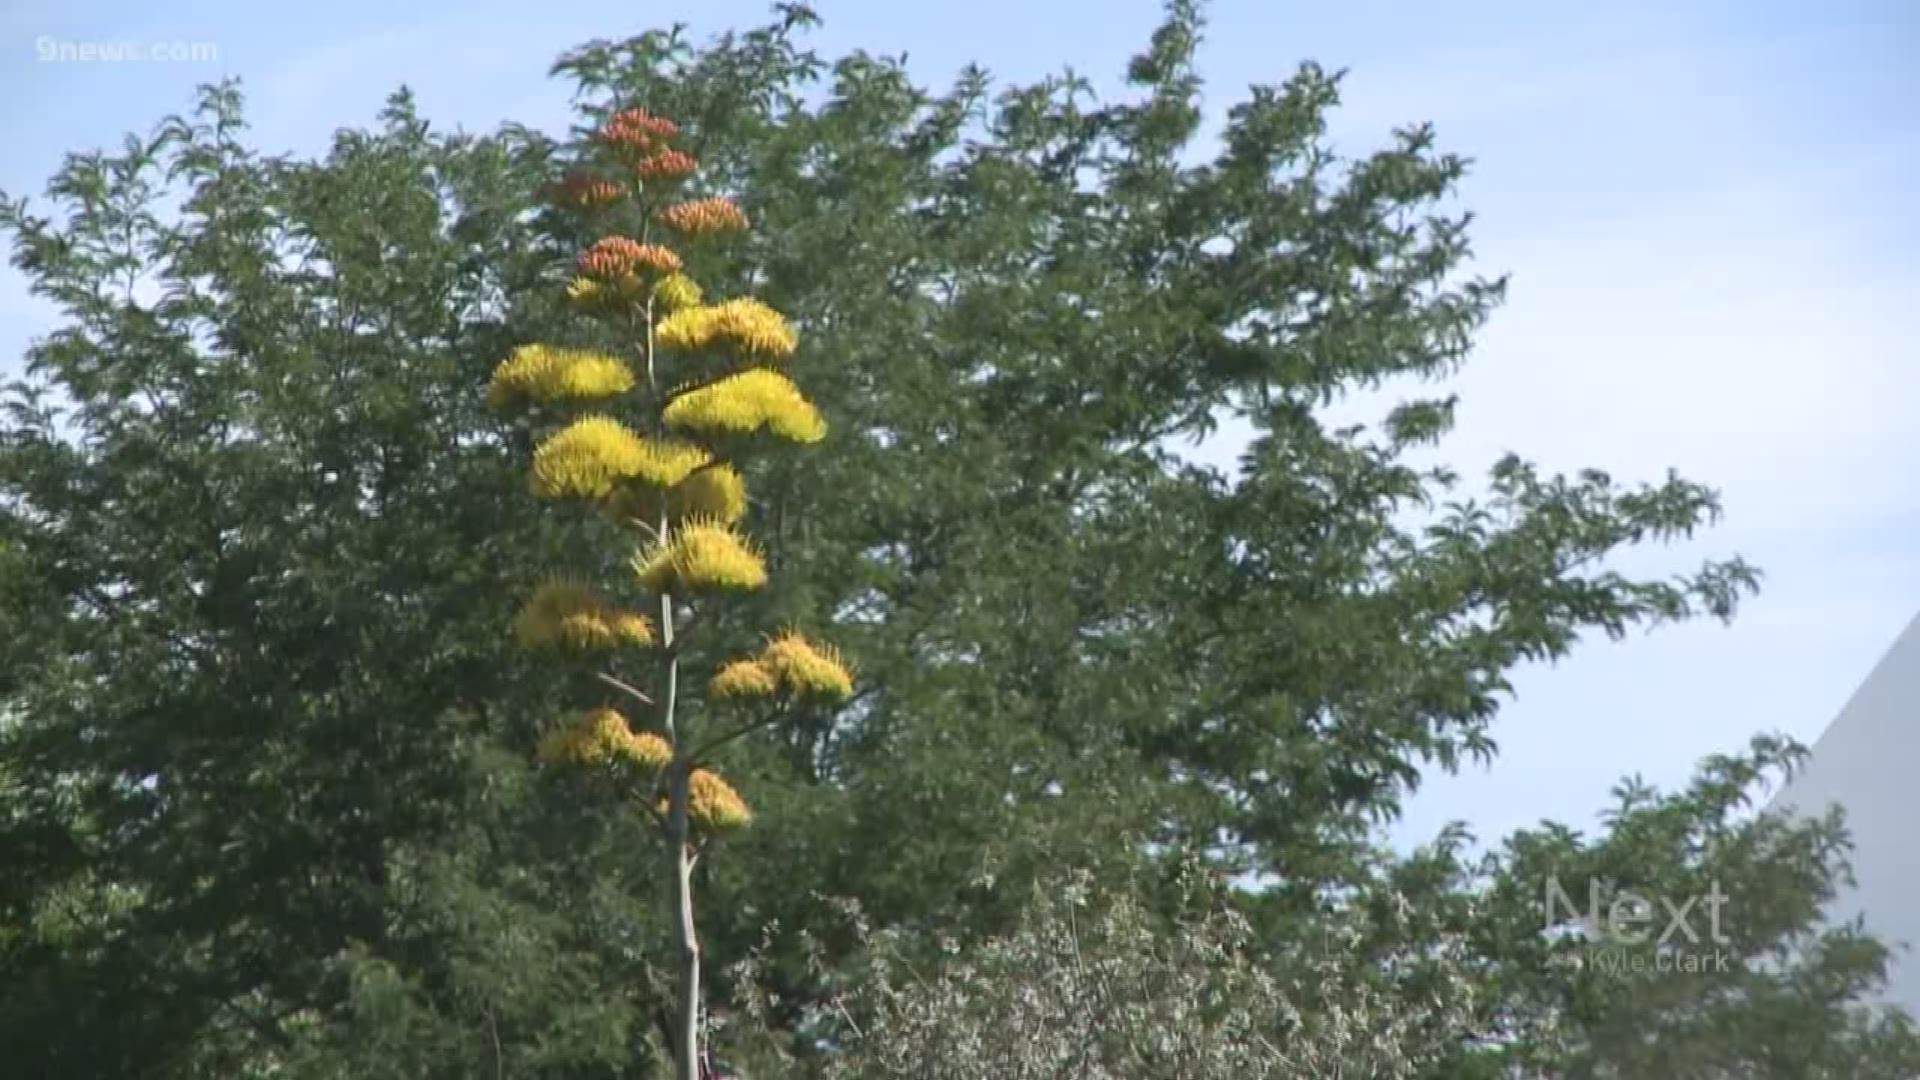 The gardens at Kendrick Lake have a pair of roughly 25-foot plants with bushy bright yellow flowers on top.